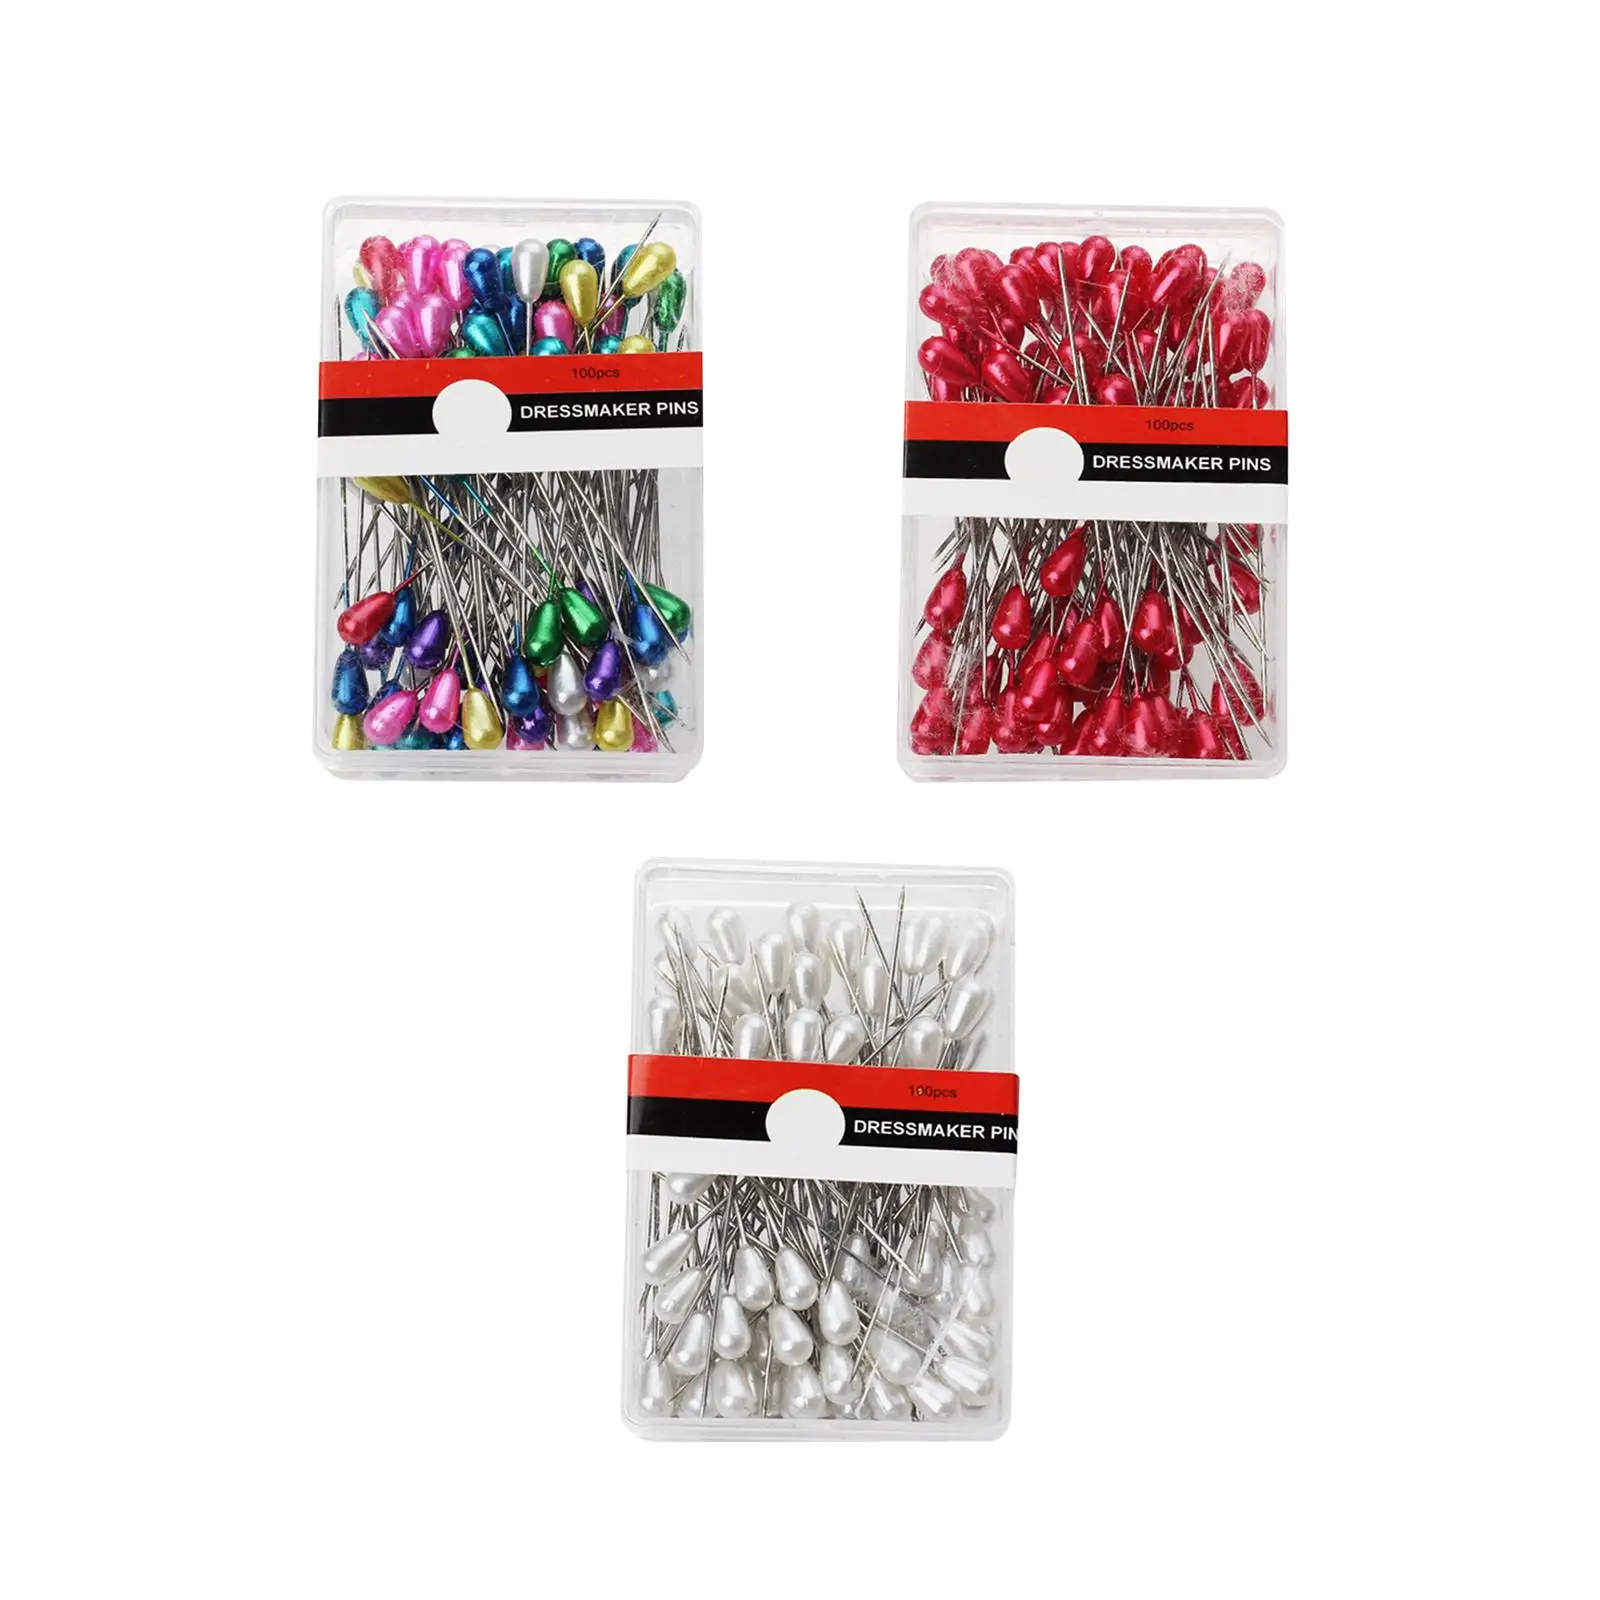 100x Sewing Pins for Fabric Pearlized Head Pin Straight Pins for Jewelry Making Project Dressmaking Patchwork Sewing Project